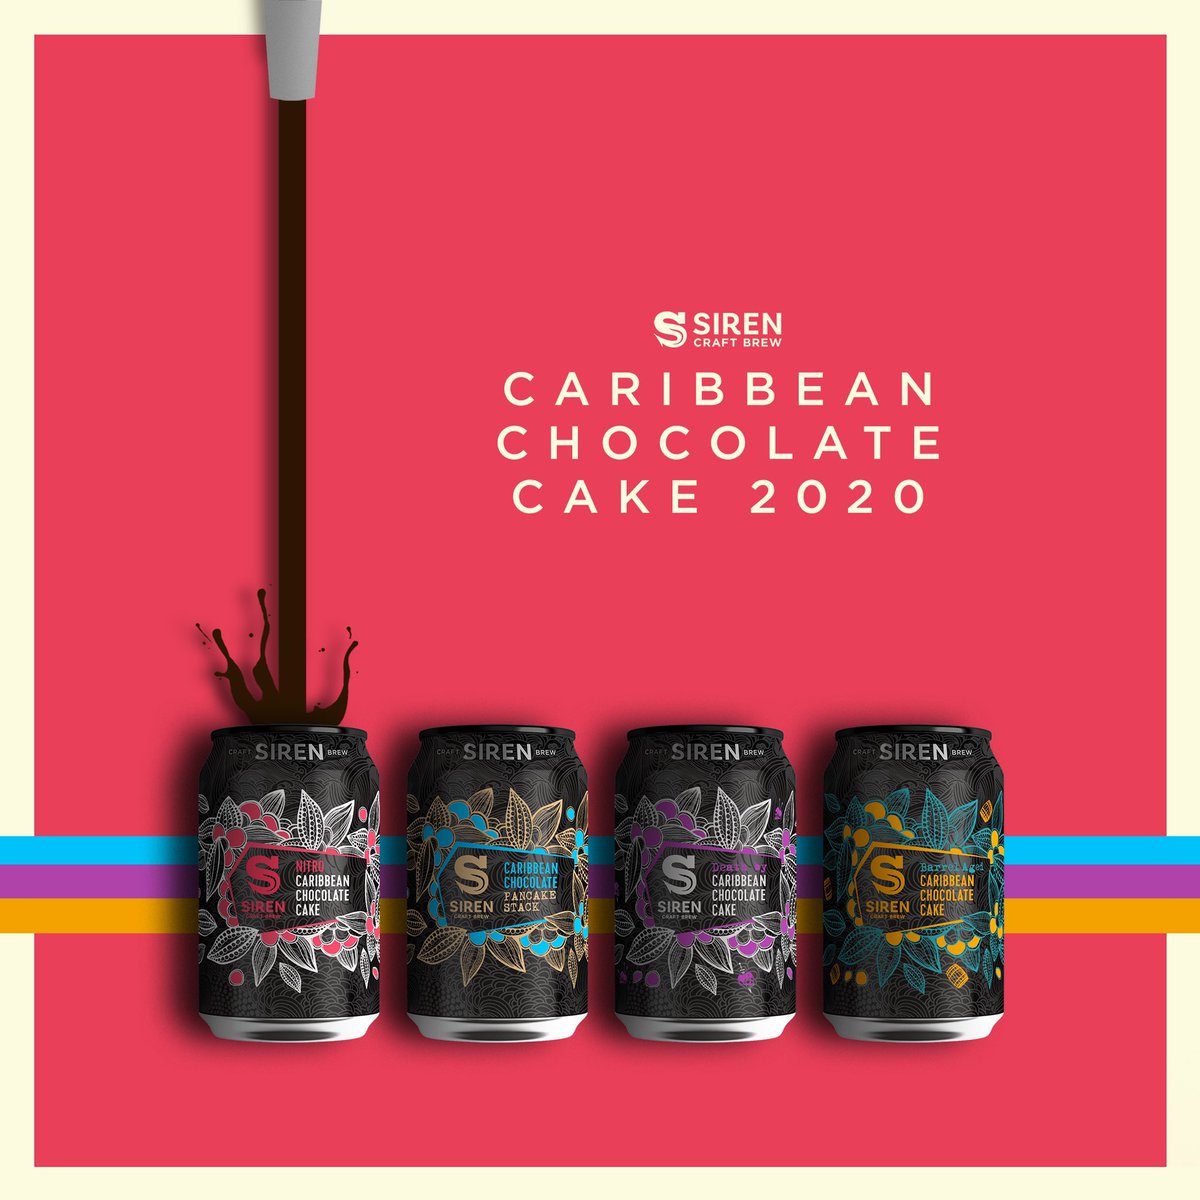 Official Launch of @SirenCraftBrew  Caribbean Chocolate Cake series at 2pm today.#CCC2020  #craftbeer #beer #beerlovers #beerloversofoxford #drinkcraft #drinklocal #Beerstagram #beersofinstagram #beerlover #beersnob #craftuk #drinkcraftnotcrap #craftnotcrap #craftbeergeek #cheers